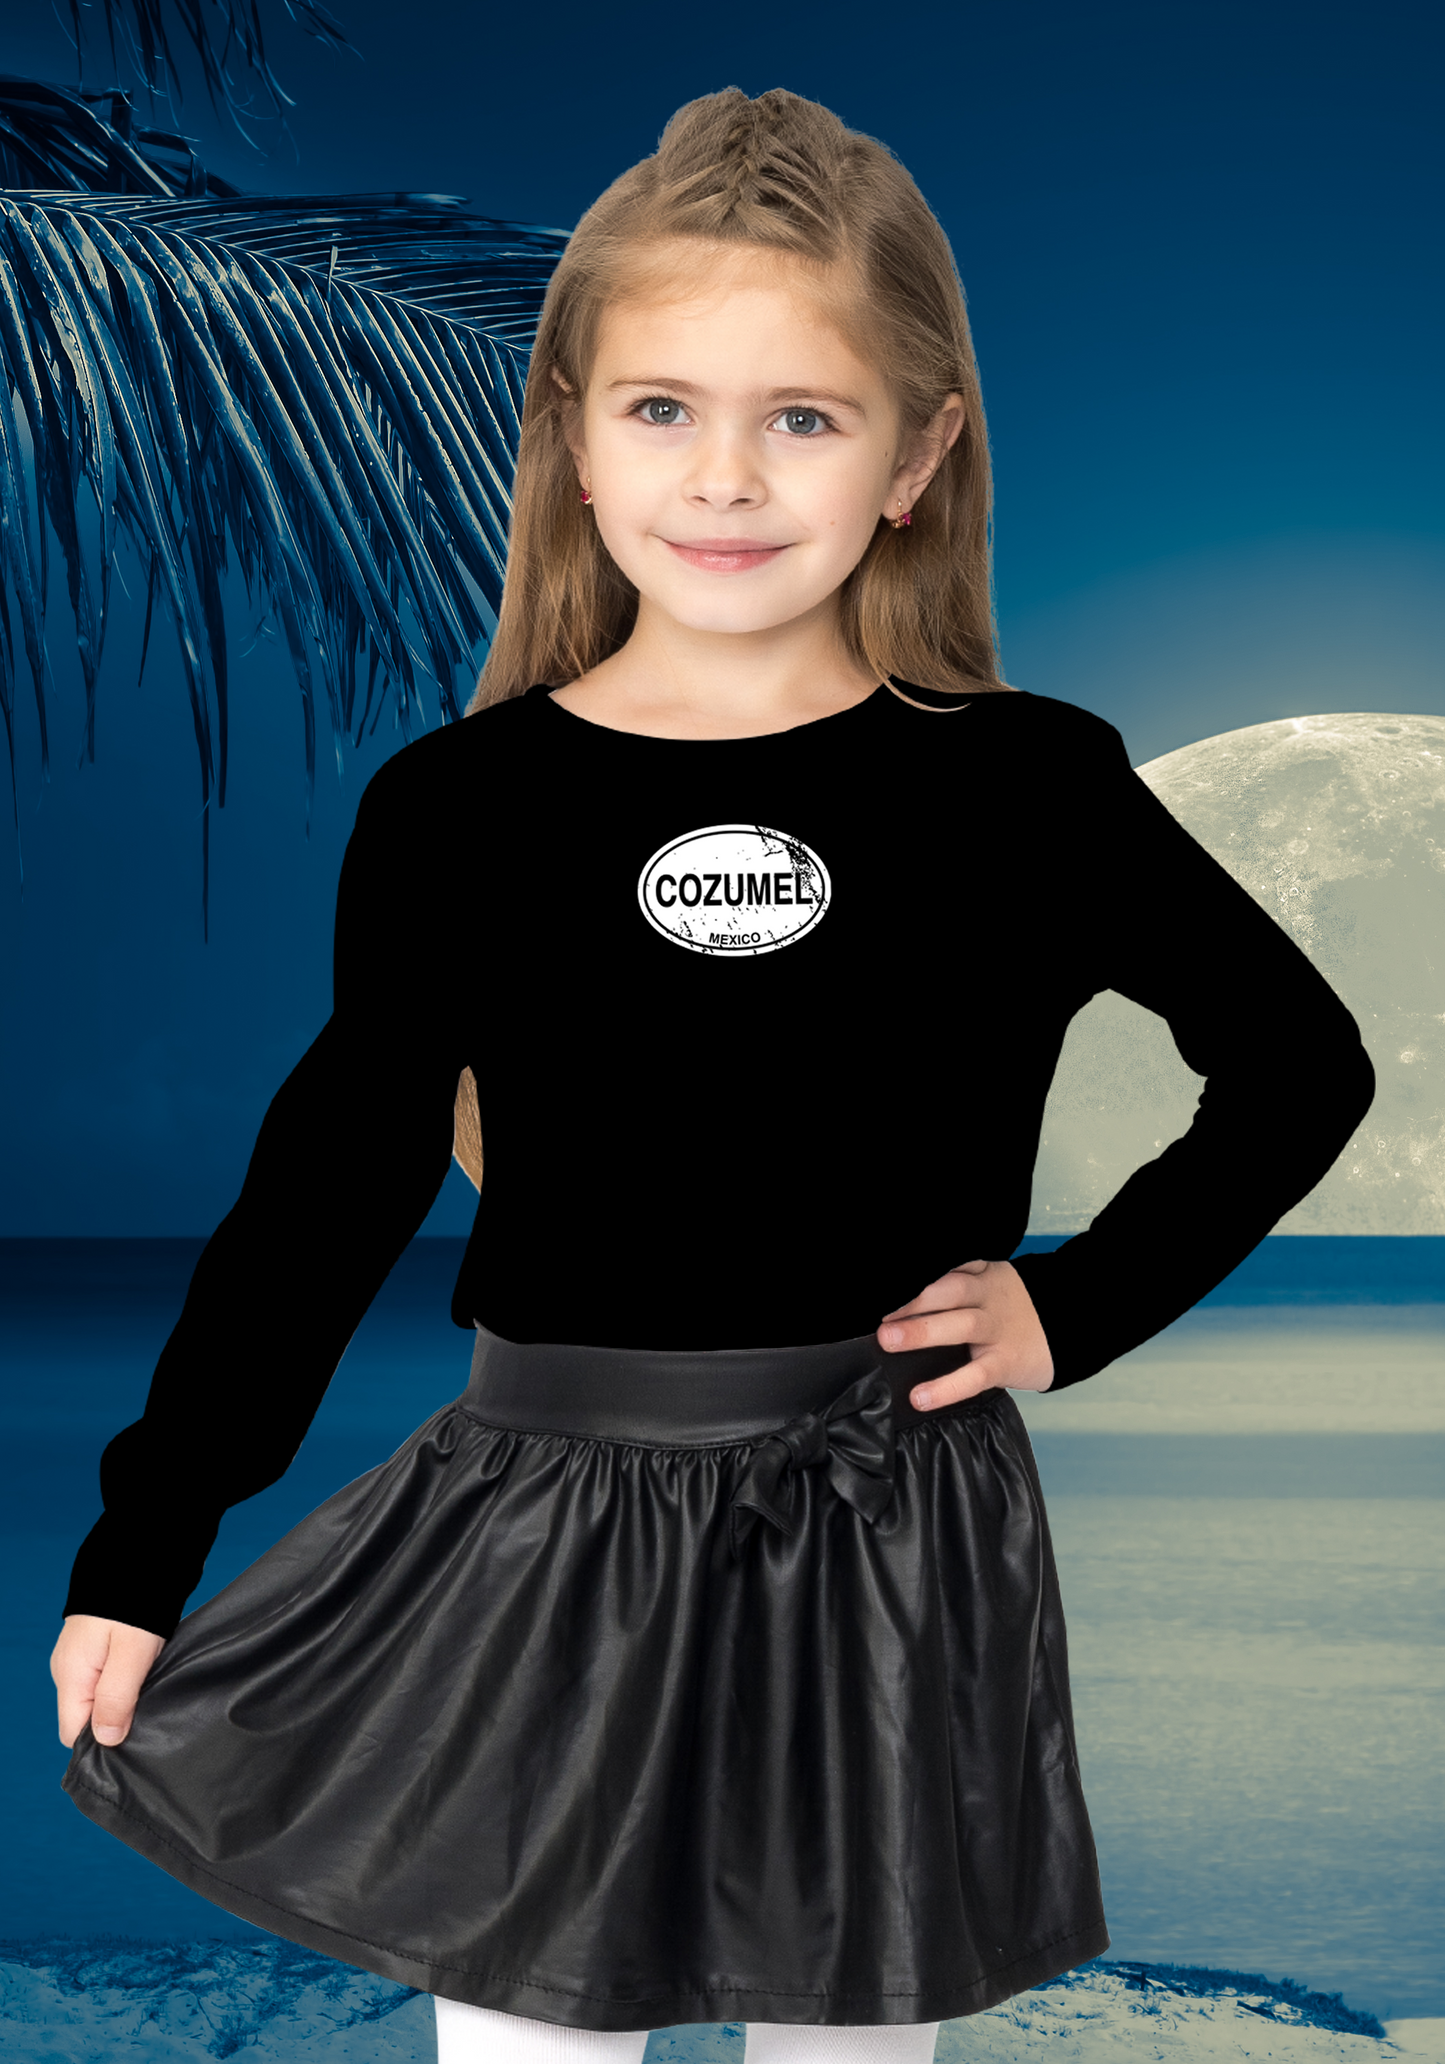 Cozumel Classic Youth Long Sleeve T-Shirts - My Destination Location